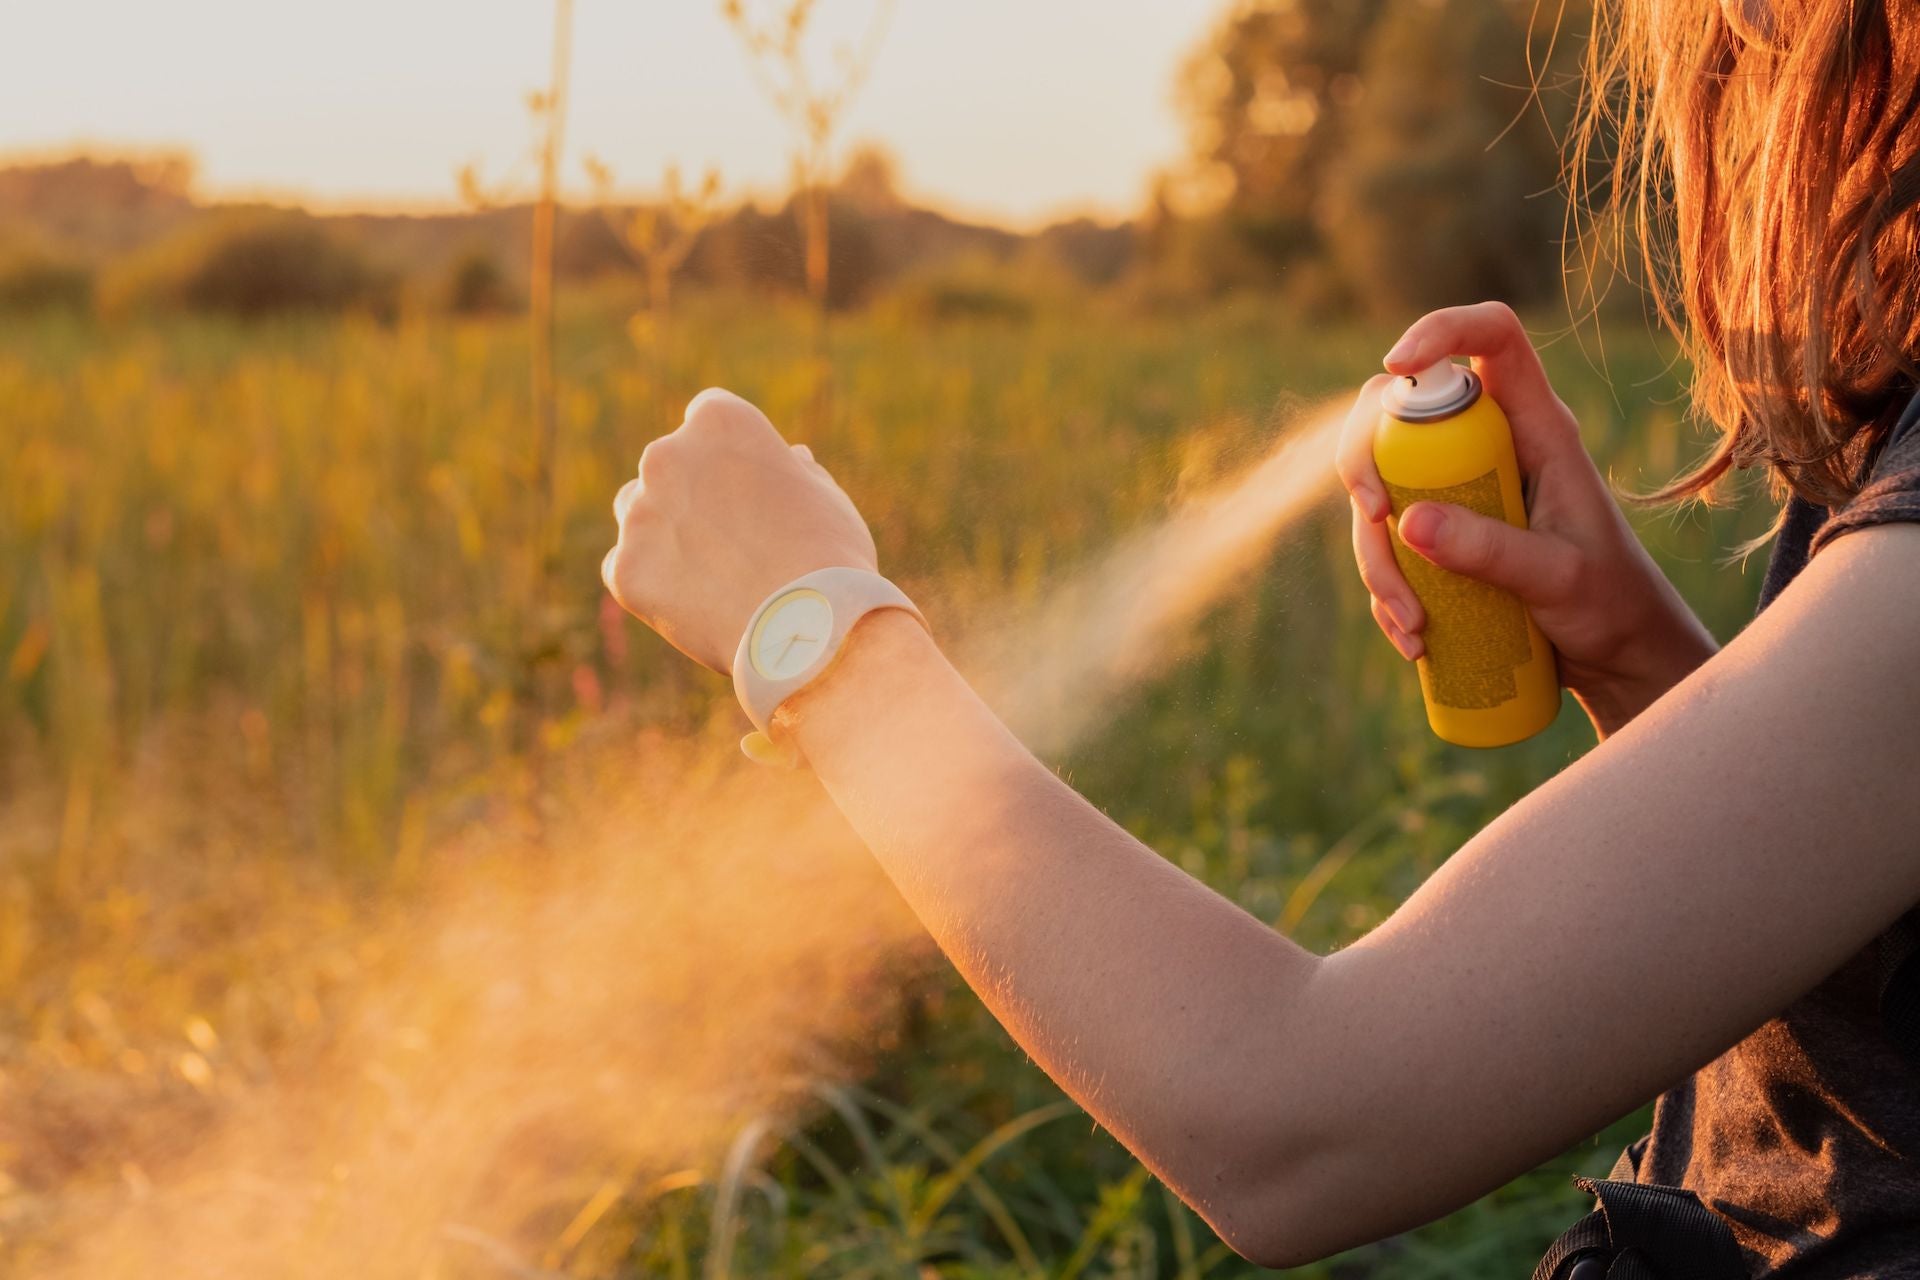 Does Lemon Eucalyptus Oil Really Work as an Insect Repellent?